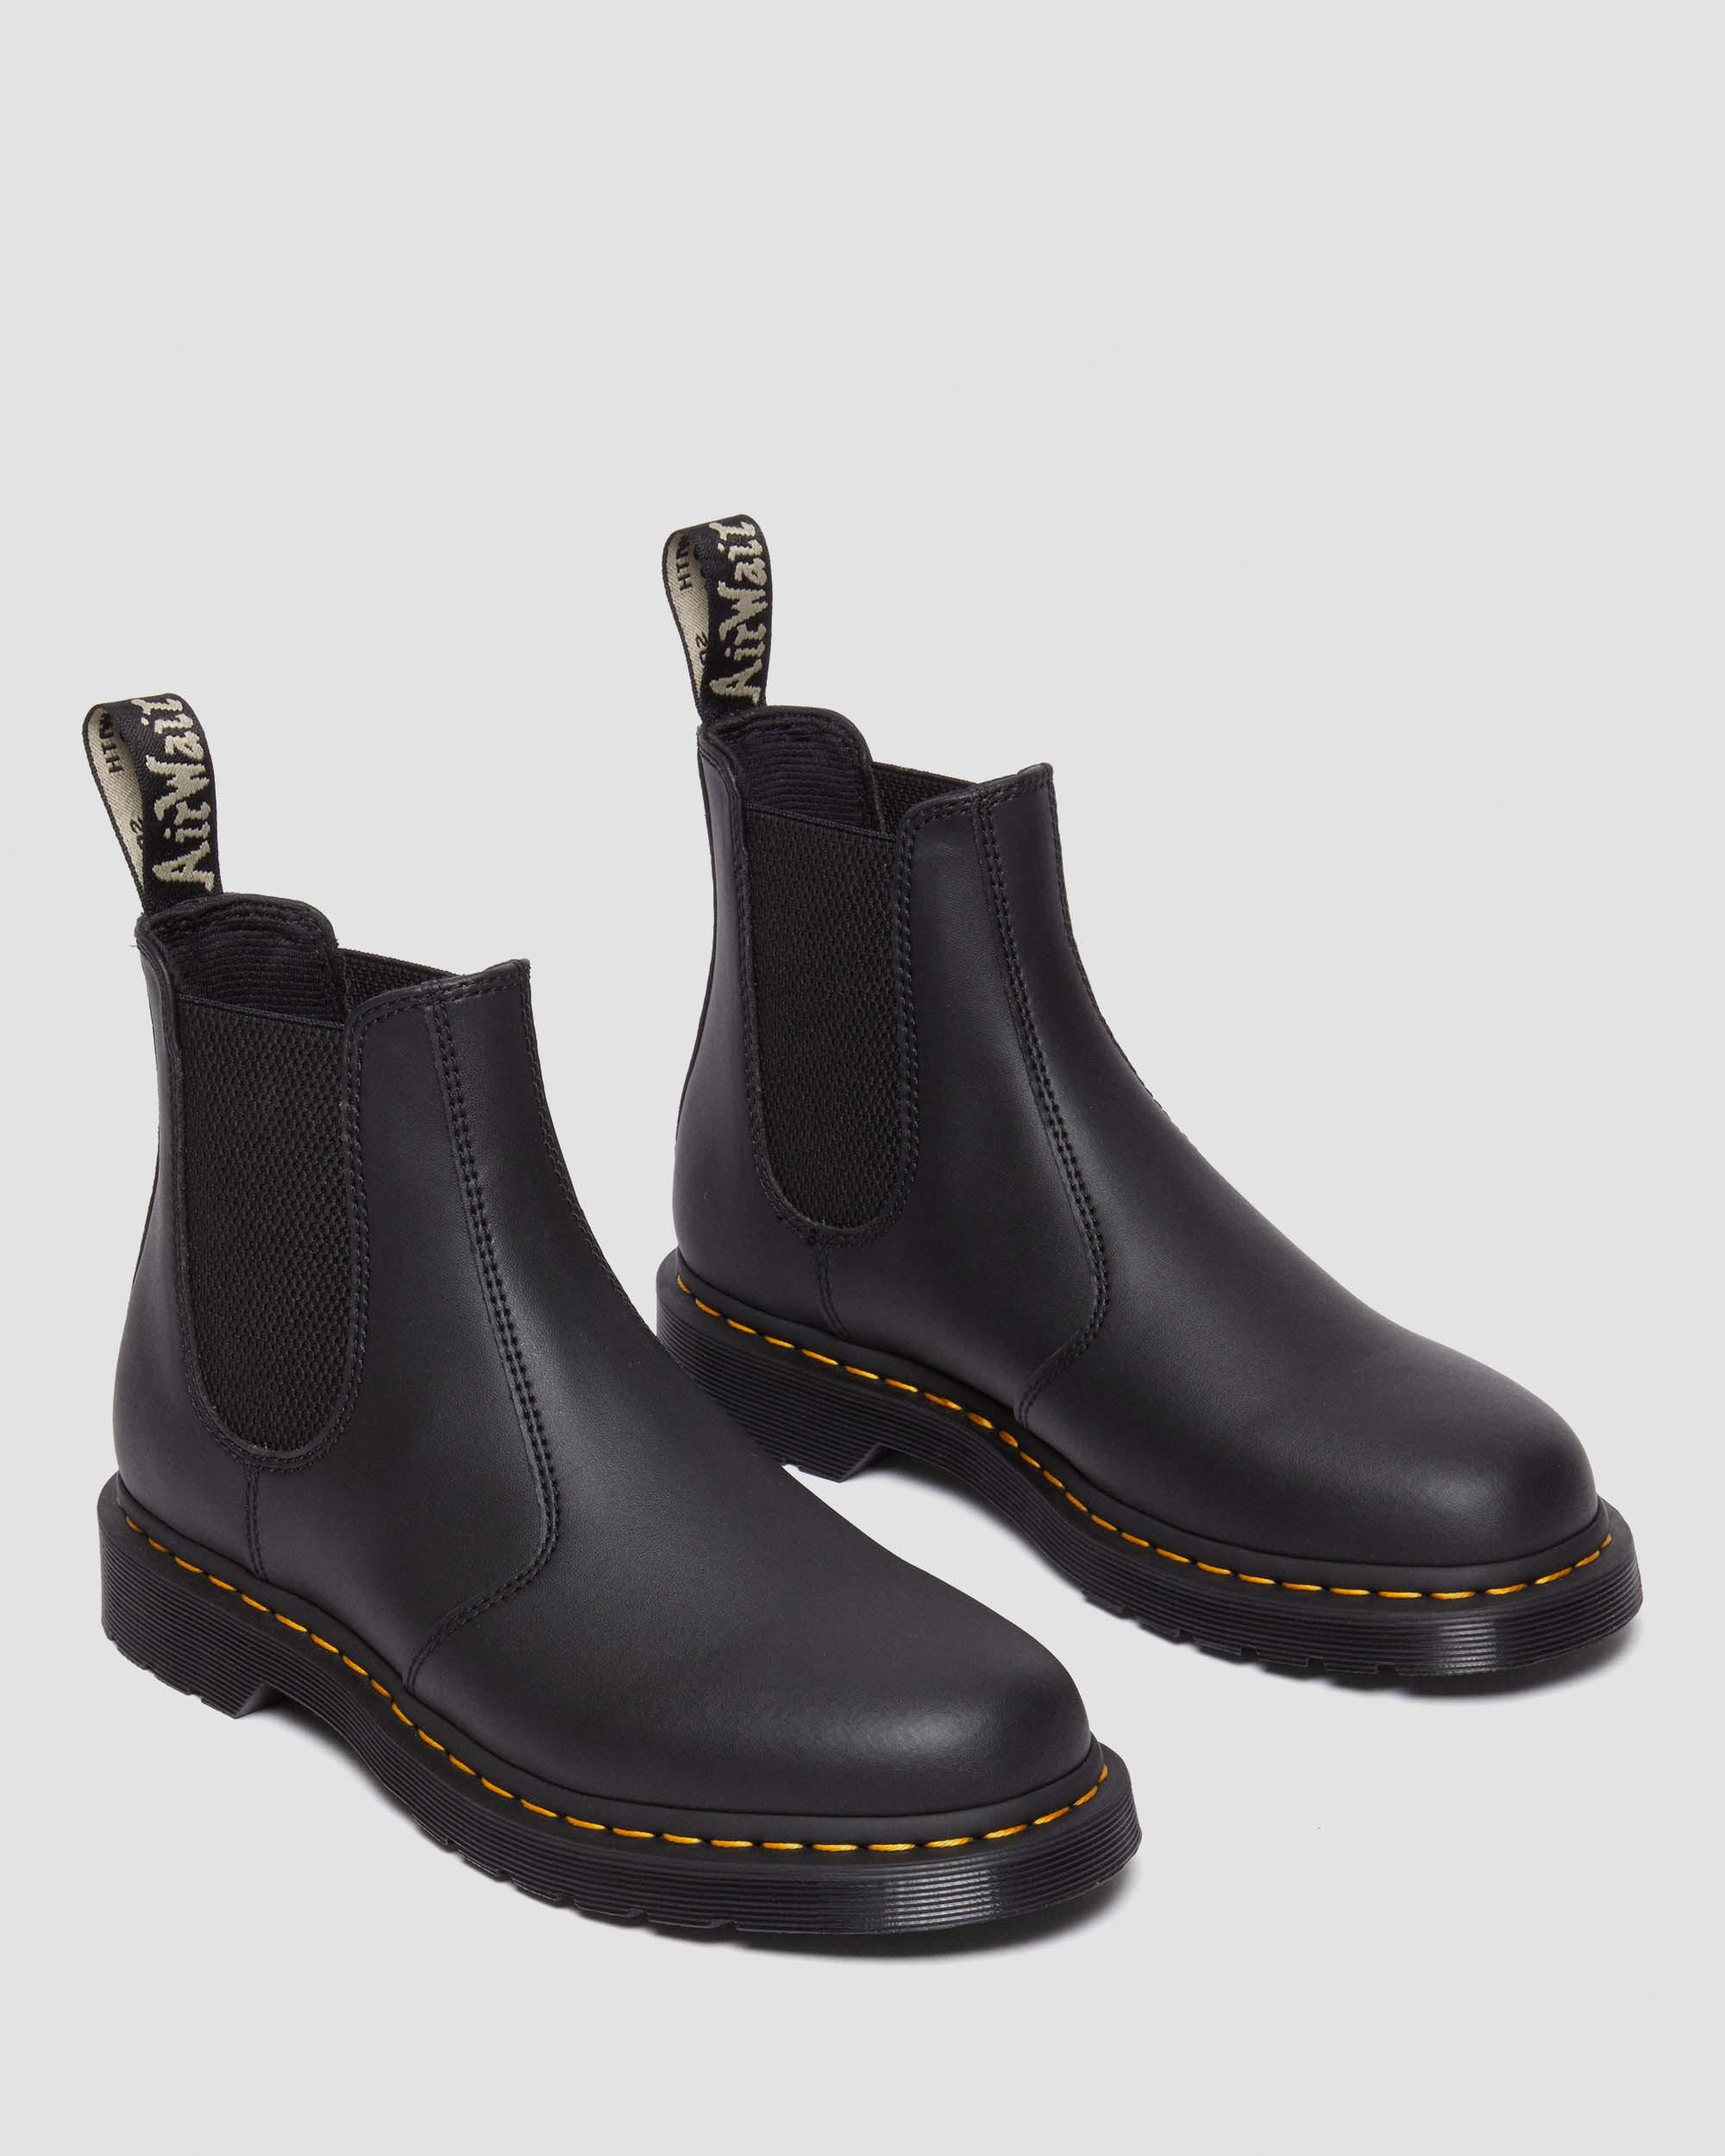 2976 Reclaimed Leather Chelsea Boots in Black